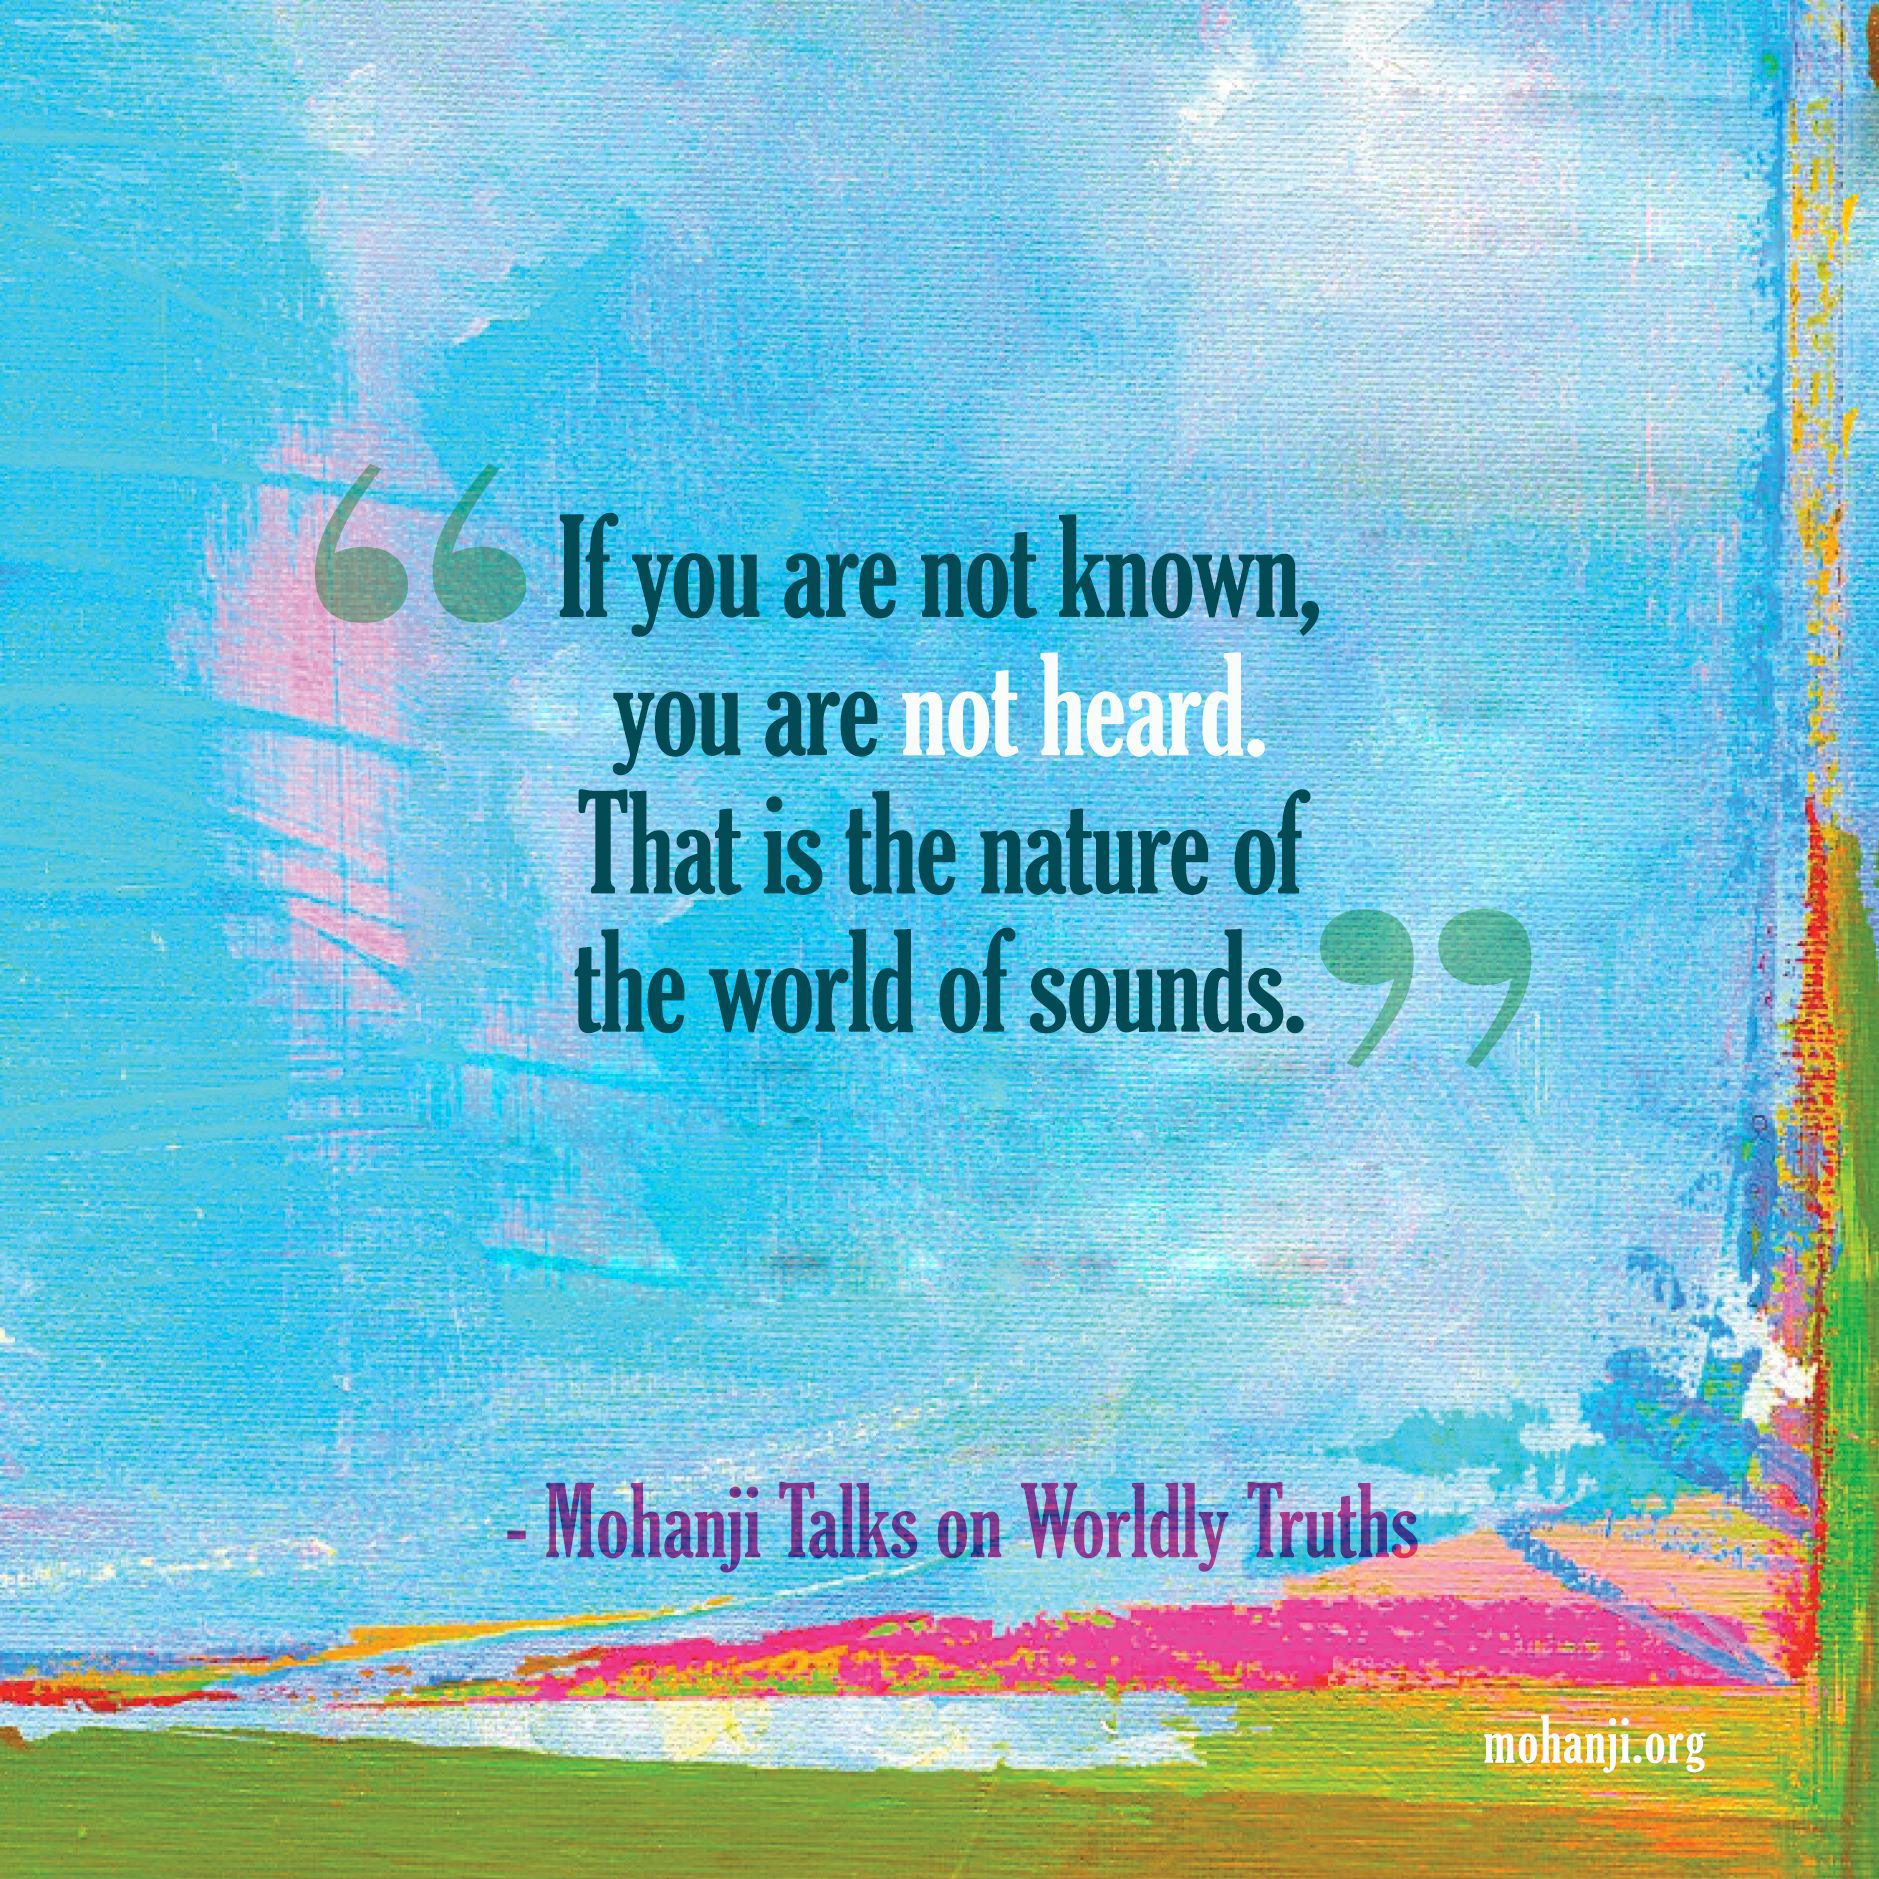 Mohanji quote - Worldly truths